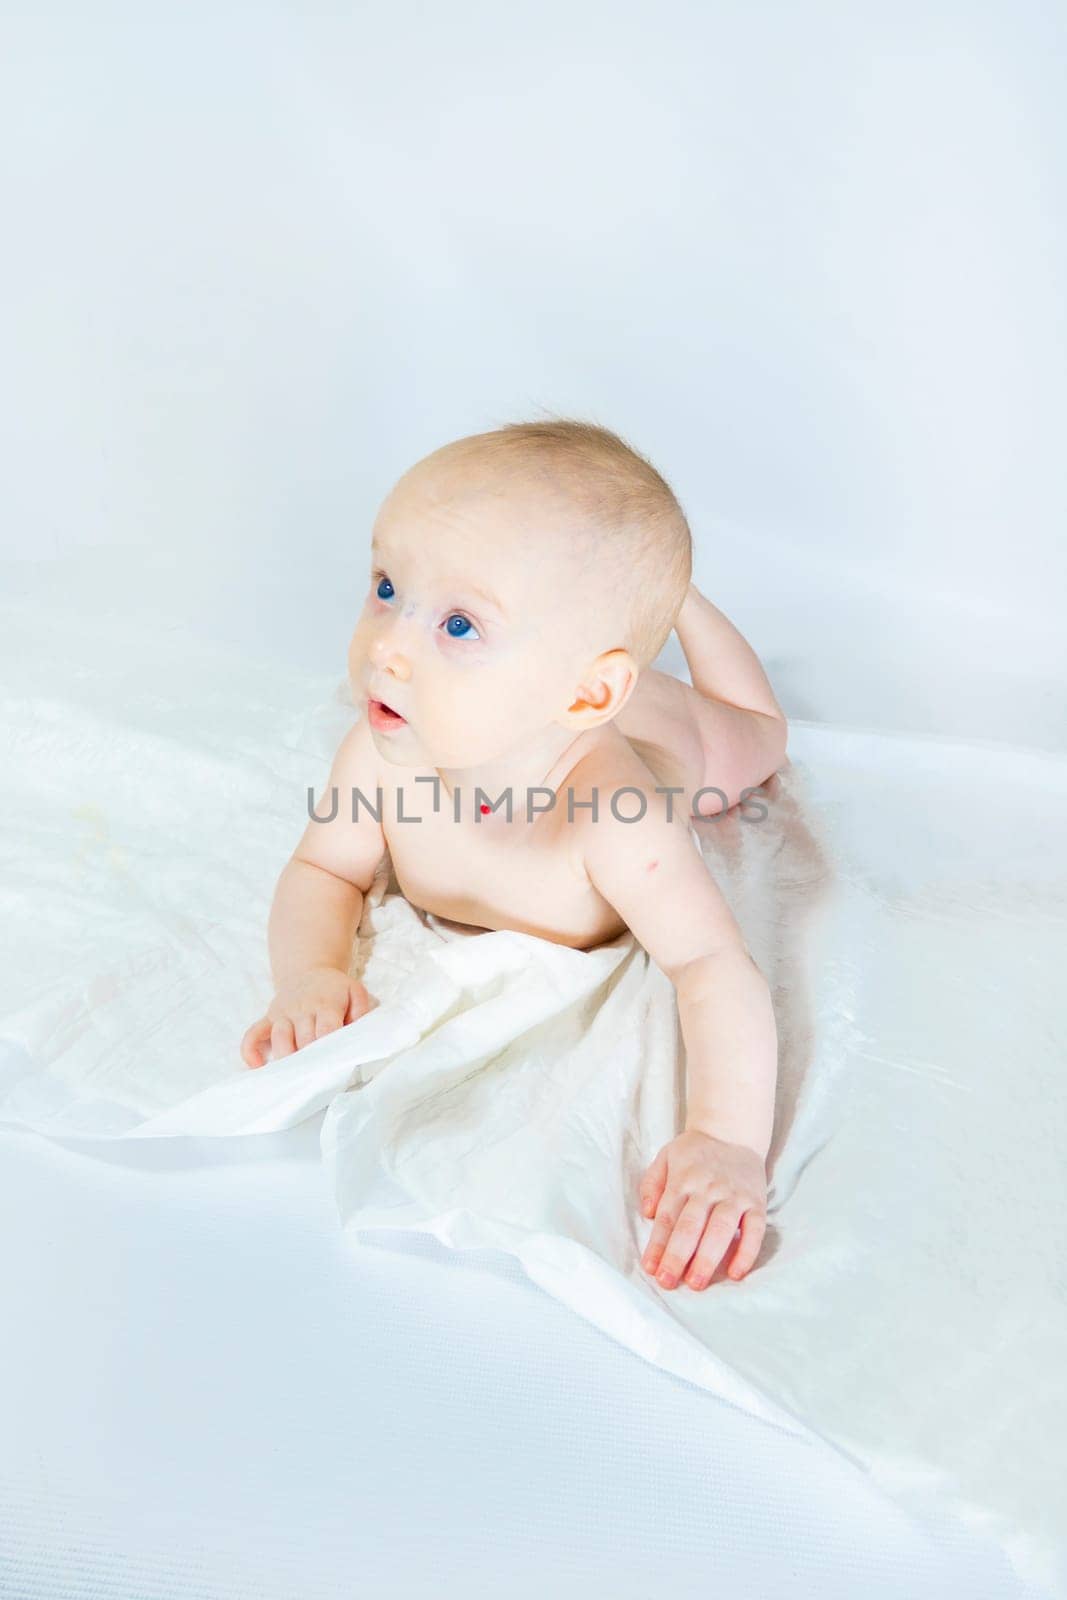 a baby with a hemangioma on his neck lies on a white background by kajasja